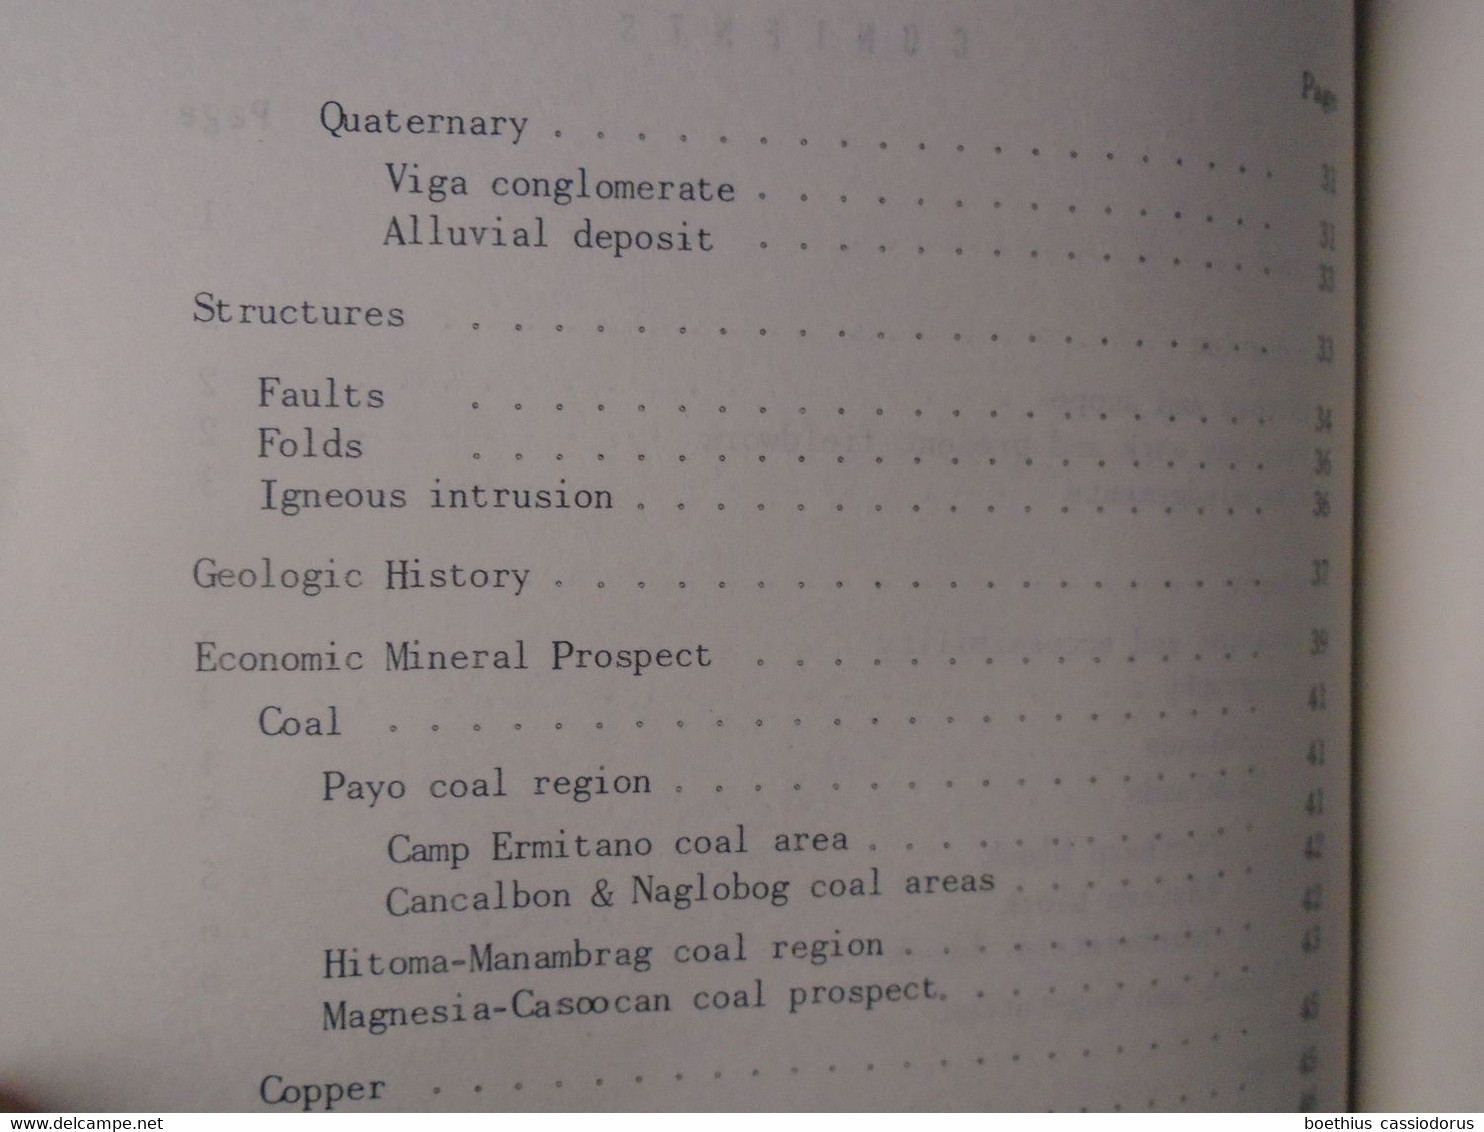 THE GEOLOGY AND MINERAL RESOURCES OF CATANDUANES PROVINCE BY FEDERICO E. MIRANDA & BASSANIO S. VARGAS 1967 PHILIPPINES - Sciences De La Terre